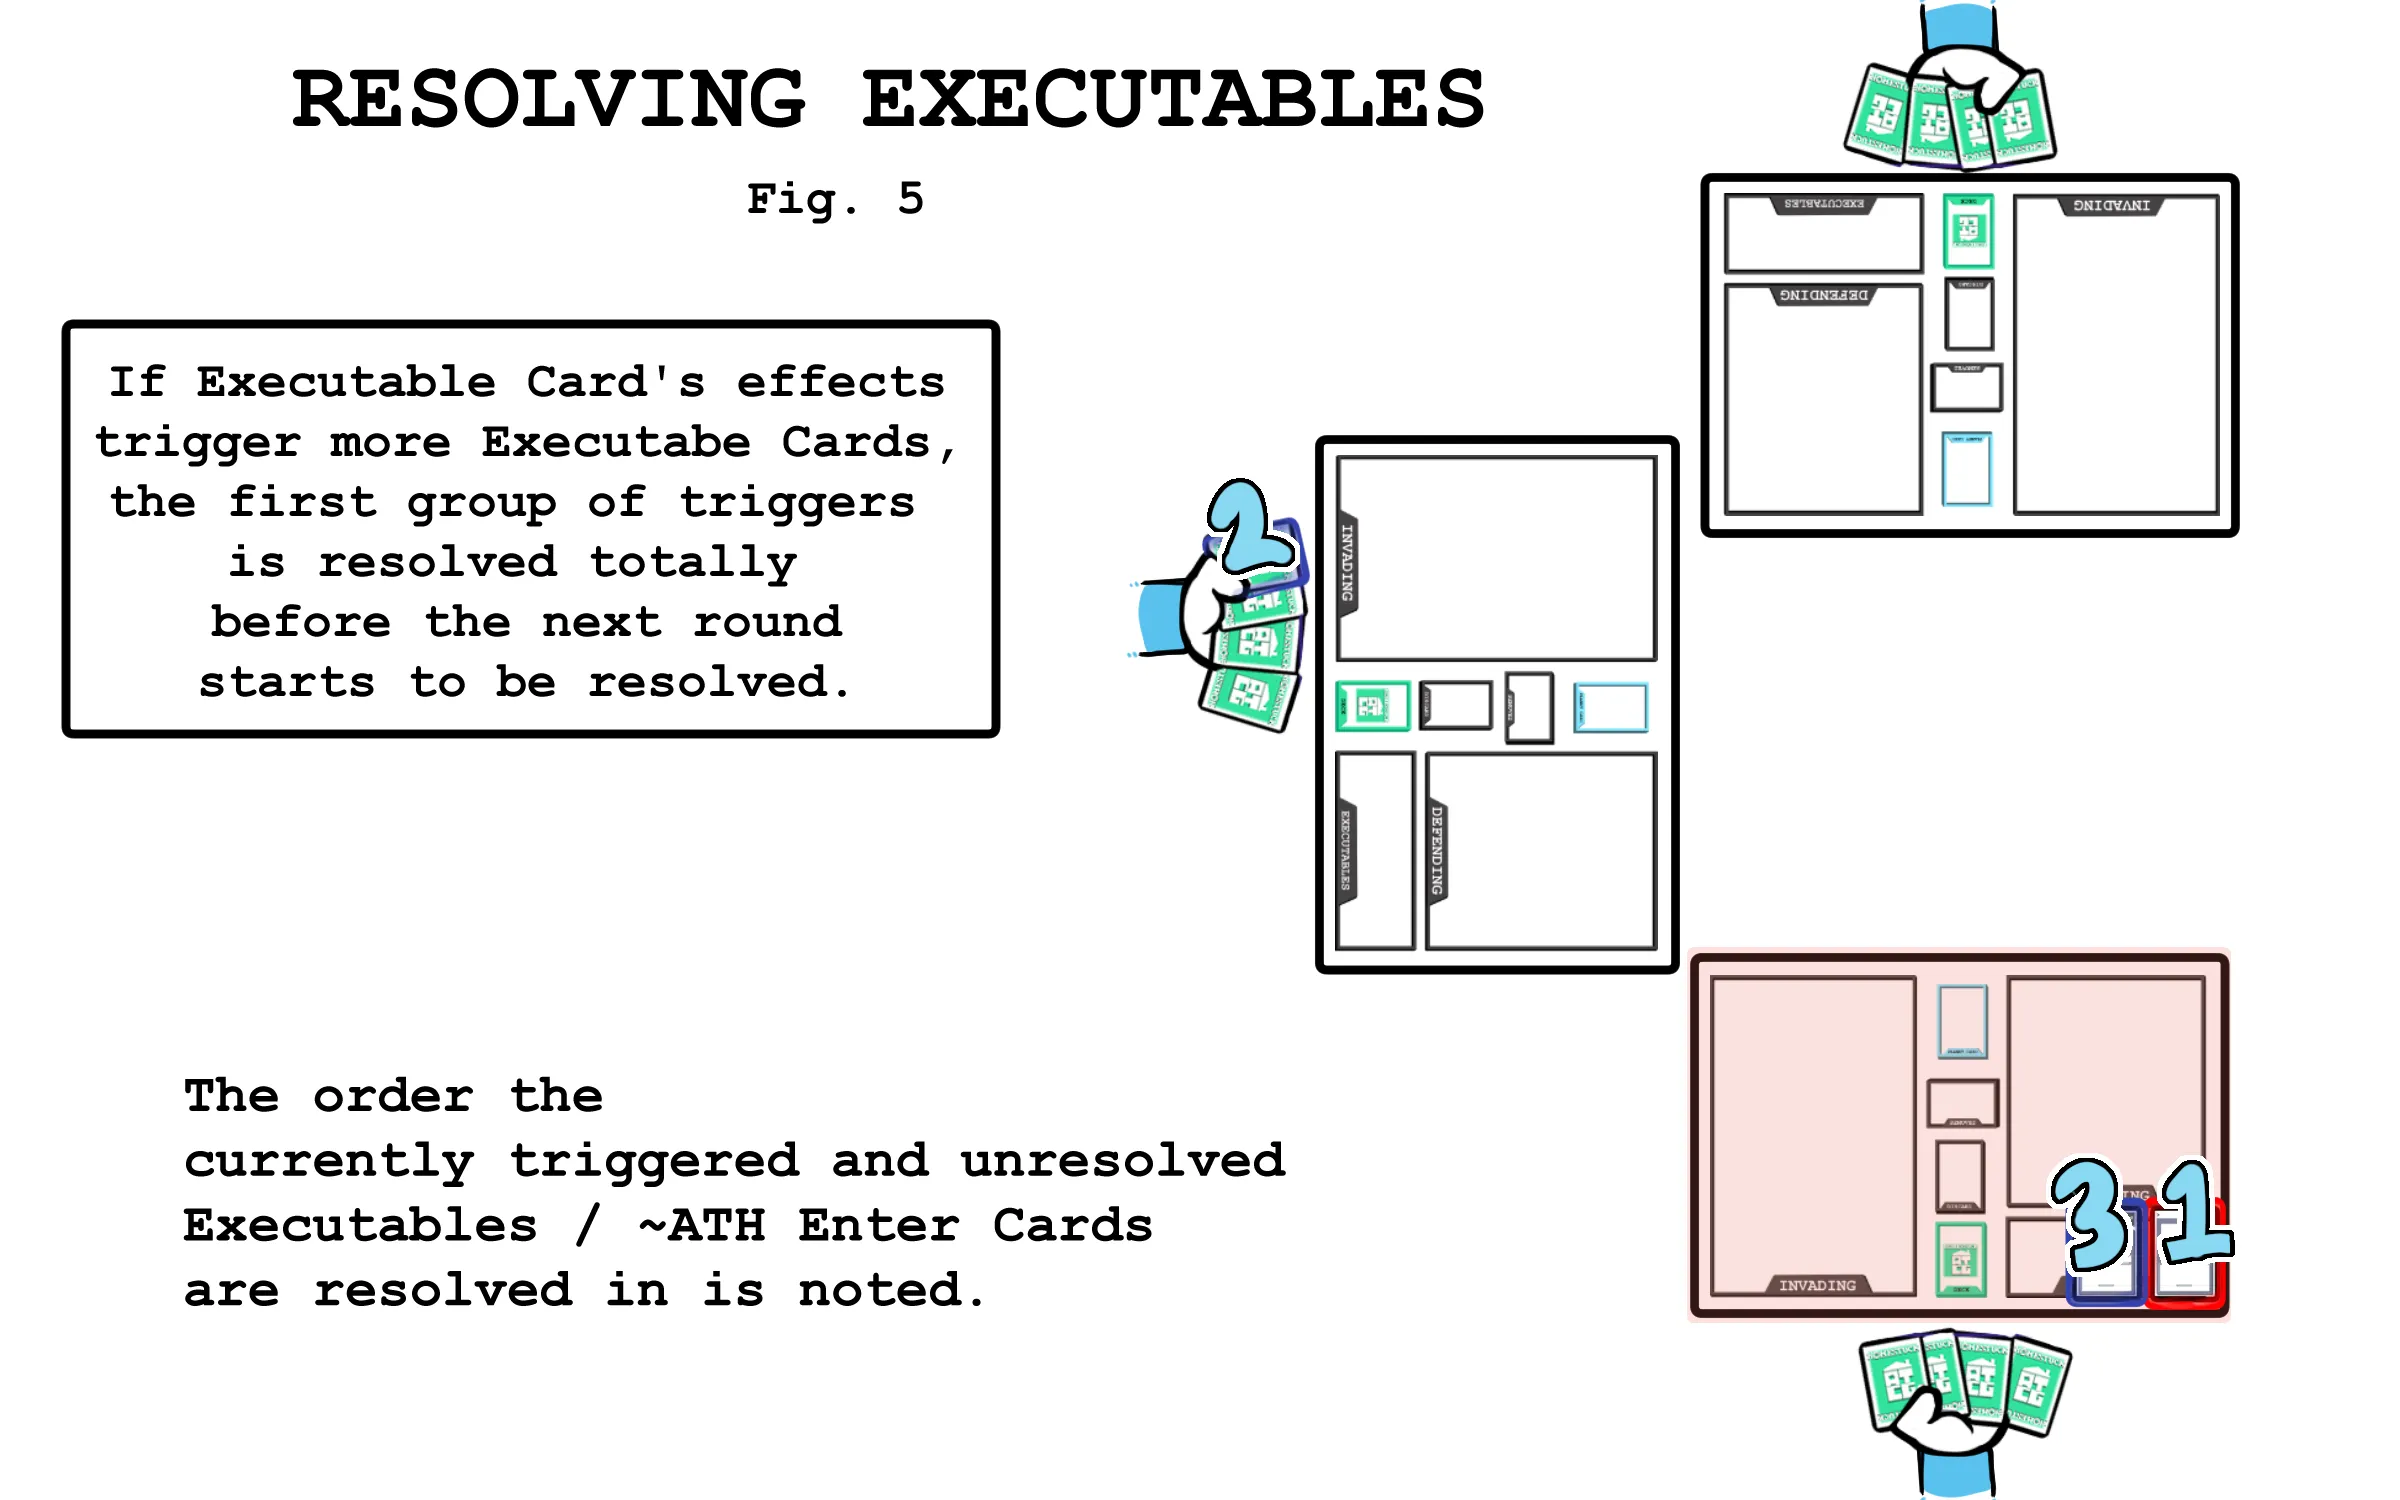 If the Executable Card's effects trigger more Executable Cards, the first group of triggers is resolved totally before the next round starts to be resolved. Continuing from Figure 4, the bottom player's right-most card must be resolved next, as it was part of the original set of executables triggered. Then, the new group of executables begins with the ~ATH Enter executable in the middle player's hand is resolved, and then the middle card in the bottom player's executable area is resolved, concluding the process.